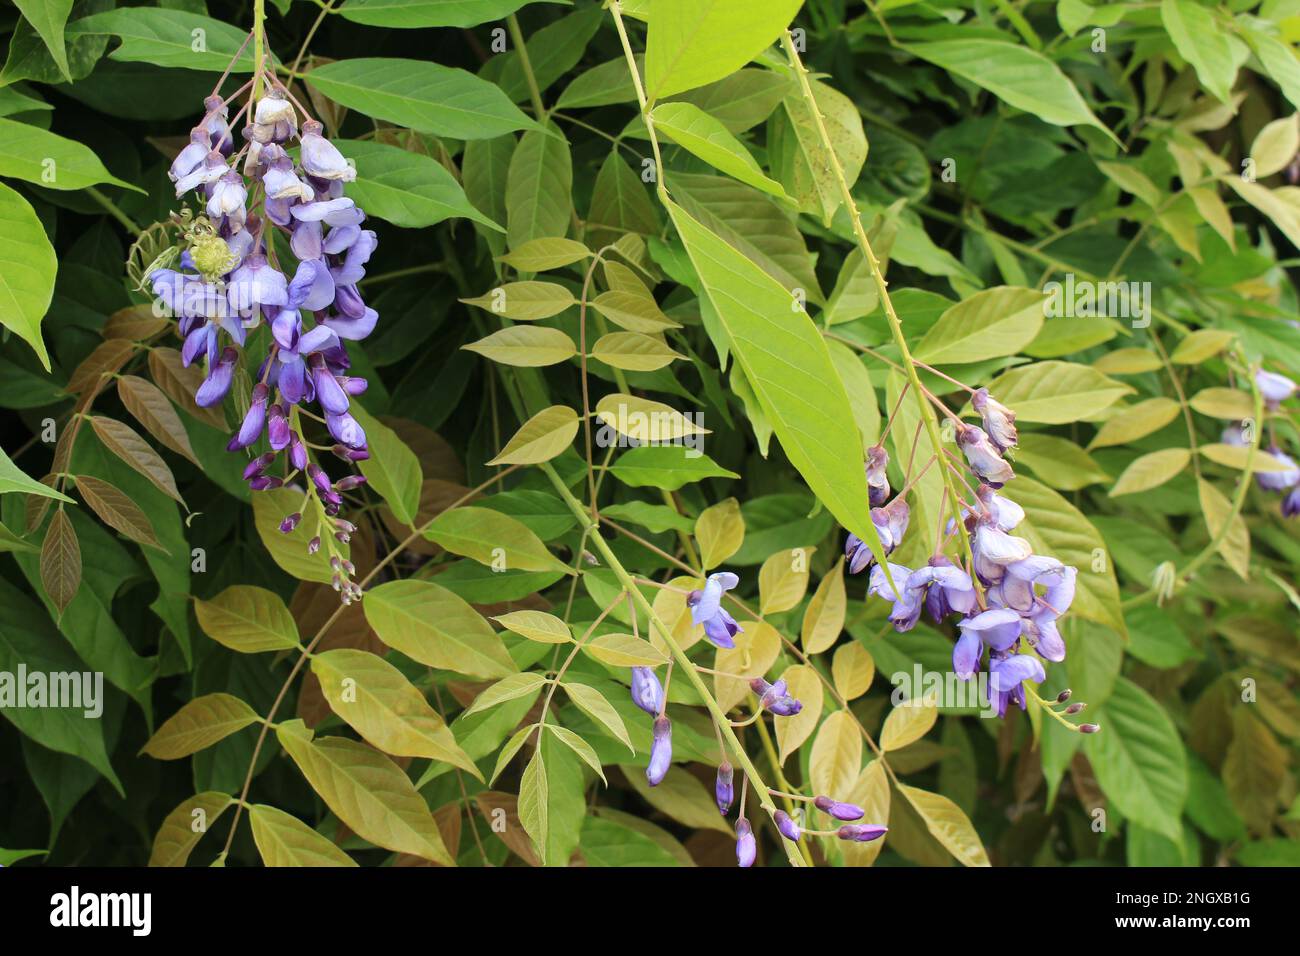 Blooming purple wisteria against green leaves background. Purple flowered drooping racemes of wisteria - natural garden screensaver or wallpaper Stock Photo